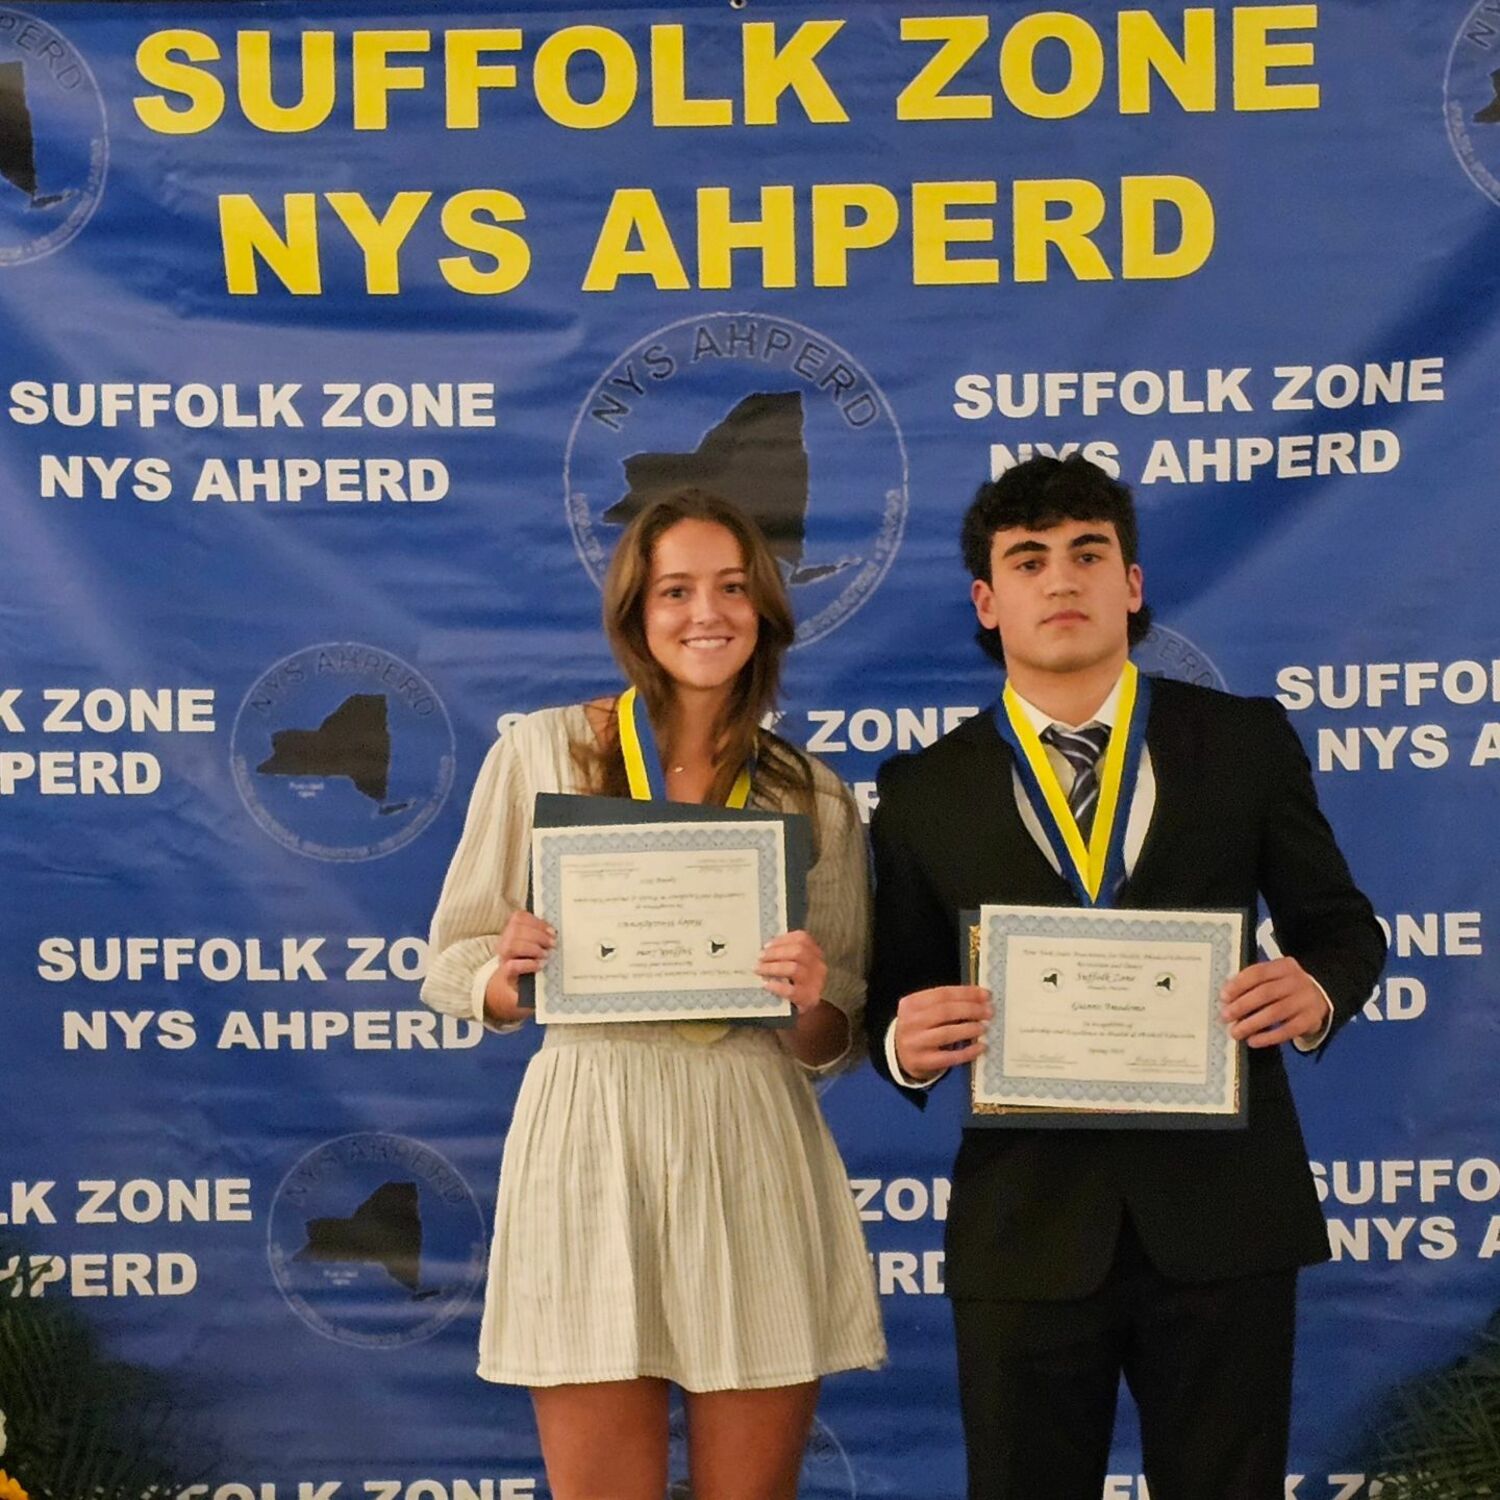 Westhampton Beach High School seniors Gianni Amodemo and Haley Waszkelewicz were honored by the New York State Association for Health, Physical Education, Recreation and Dance as winners of their school's Suffolk Zone Student Leadership Award. The two were selected based on their excellence in physical education, leadership ability and service to the community. COURTESY WESTHAMPTON BEACH SCHOOL DISTRICT